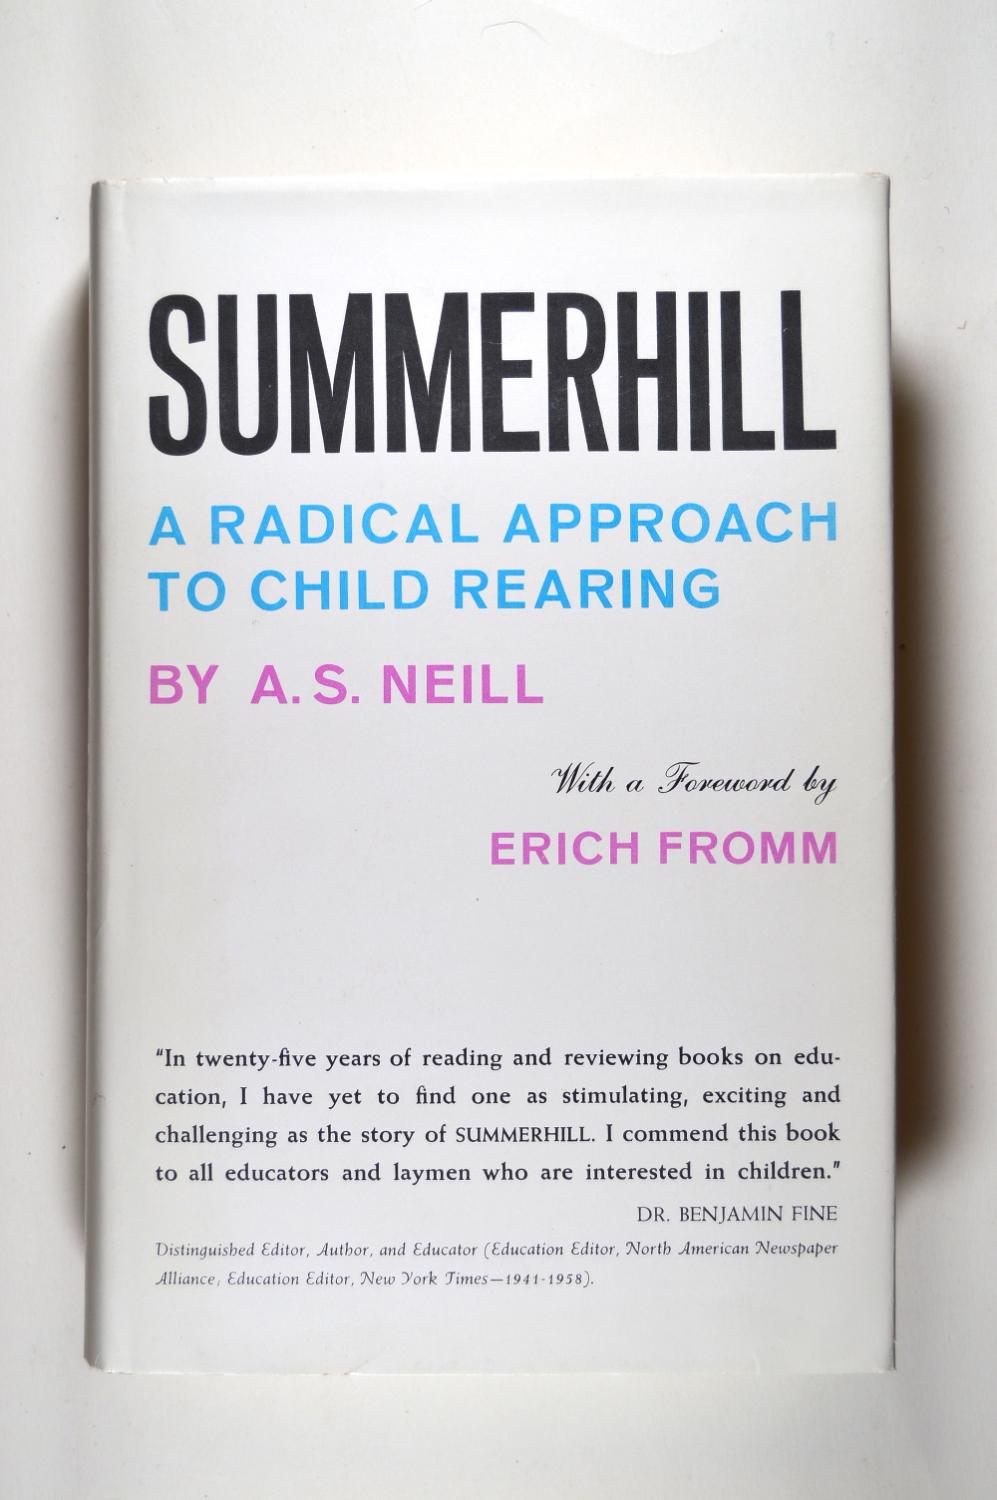 Download Summerhill full text from archive.org